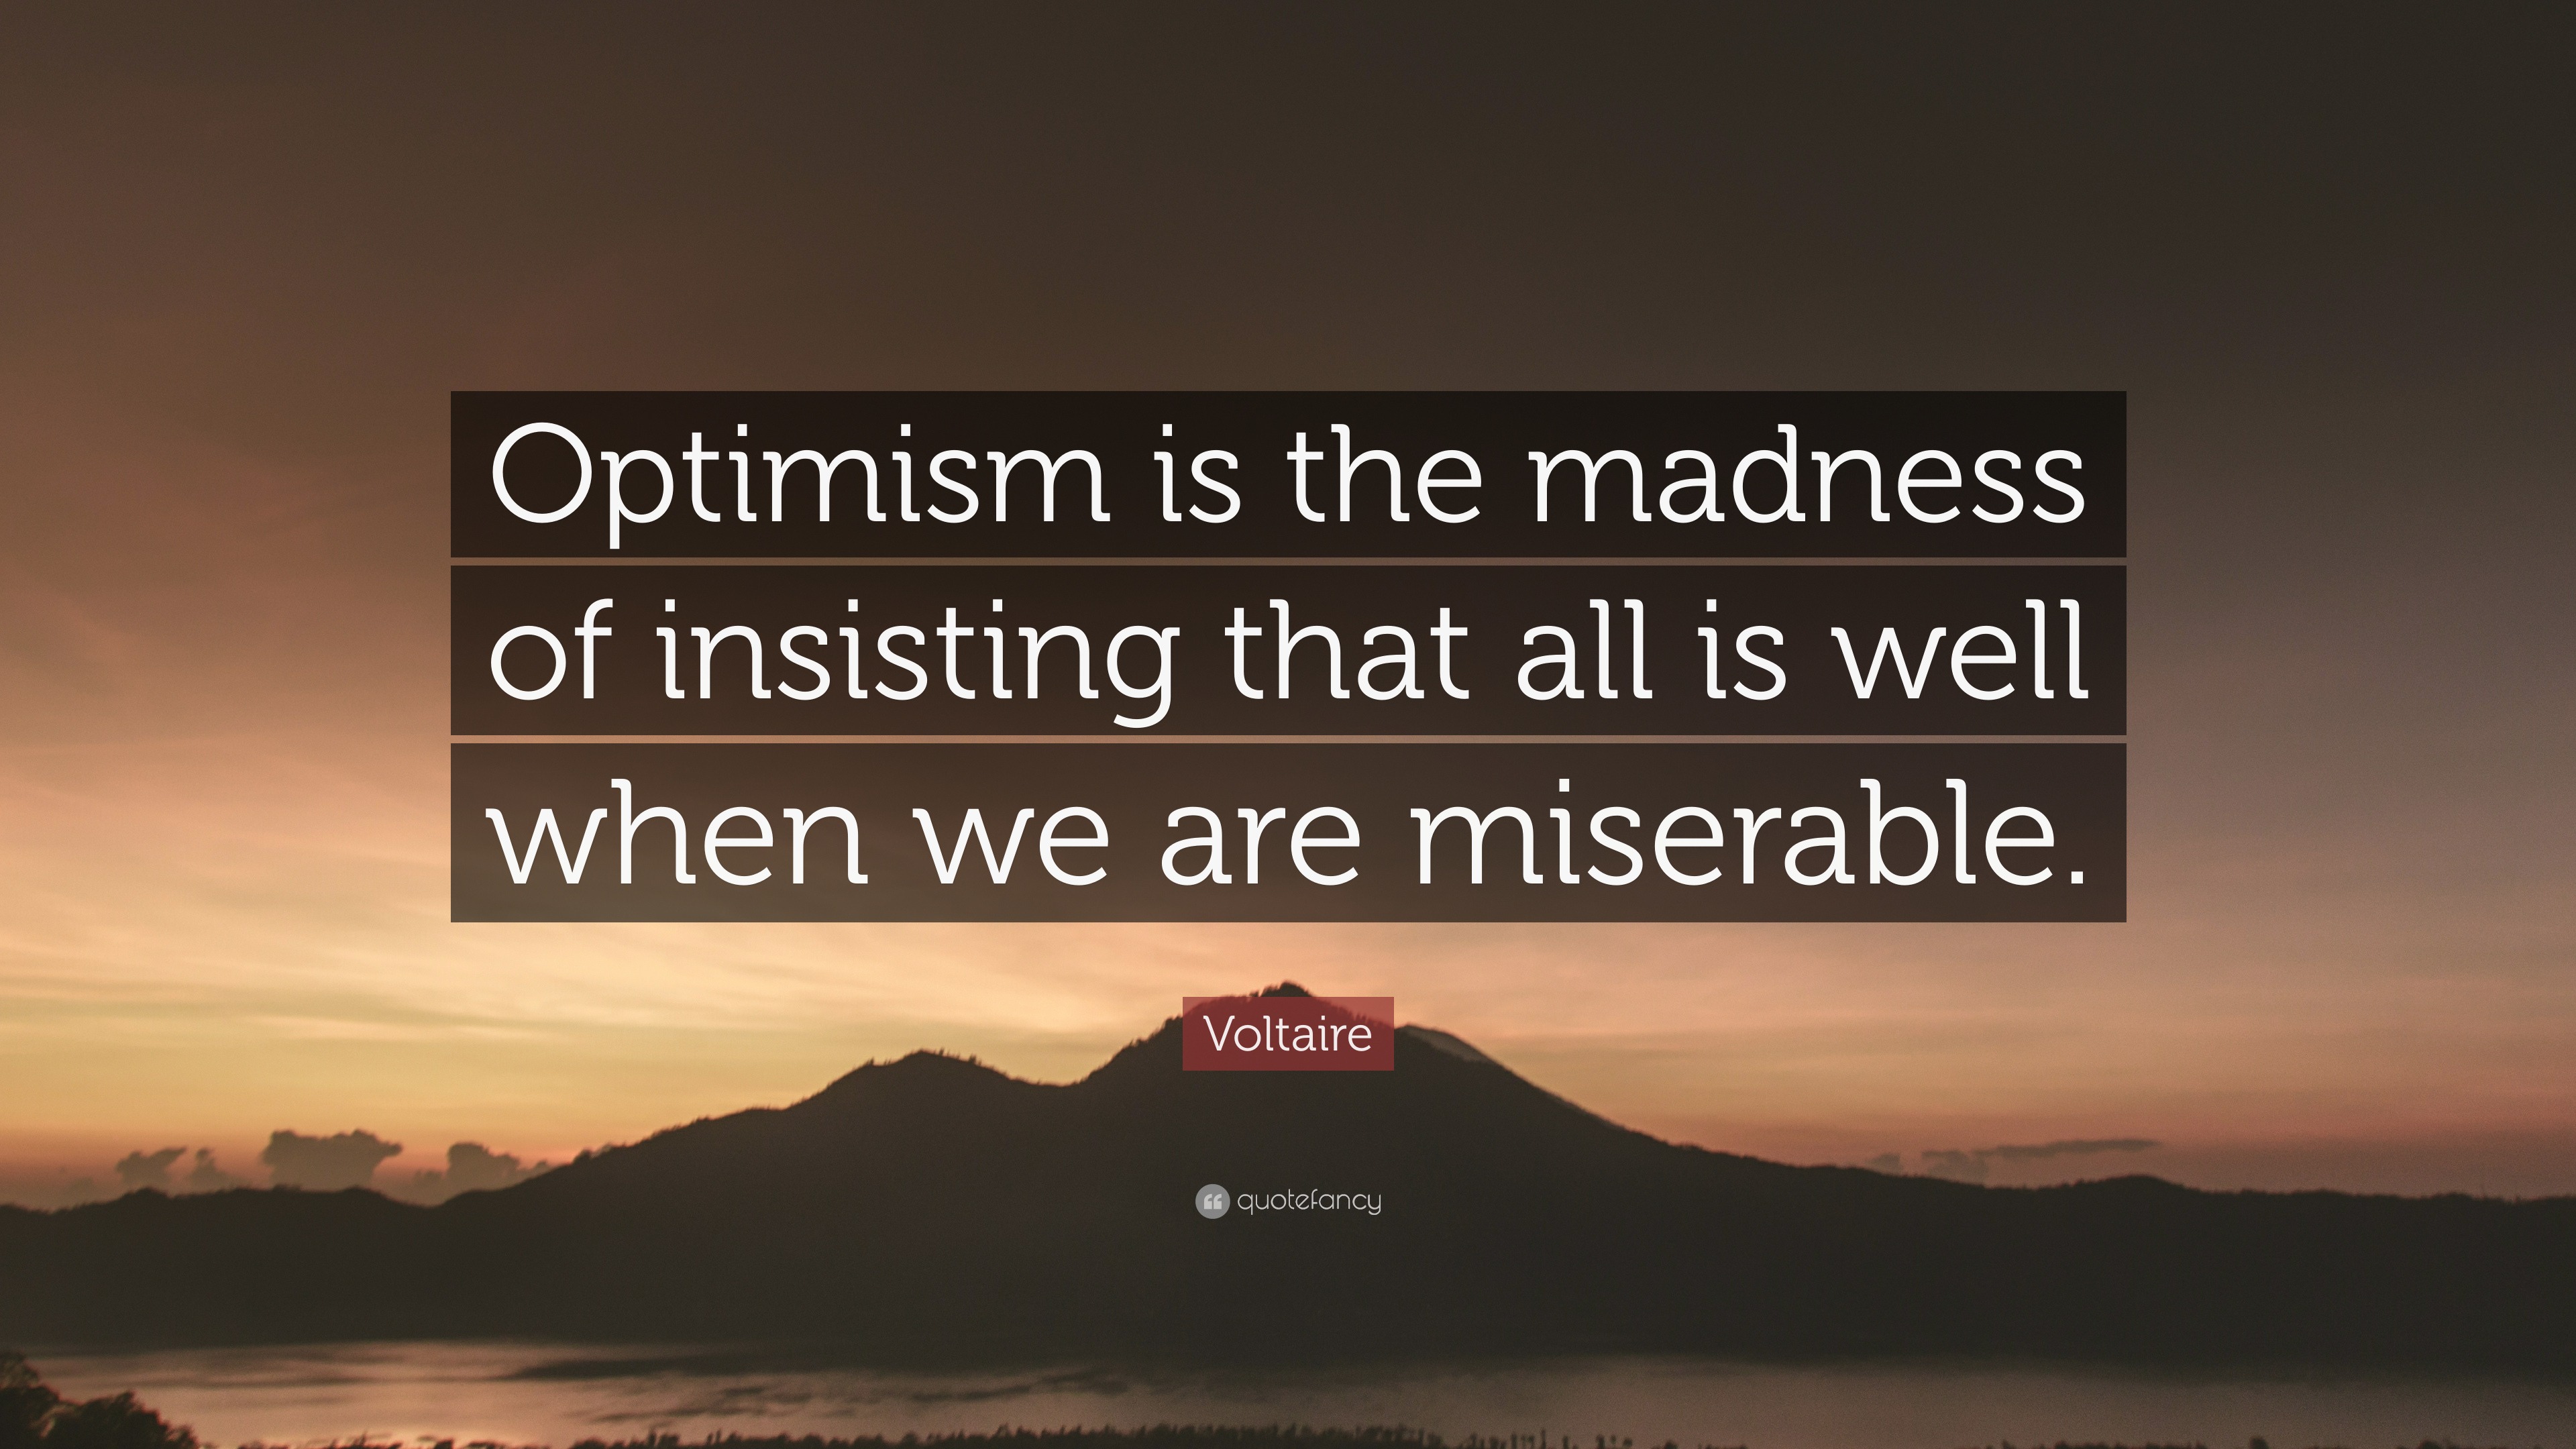 Voltaire Quote: “Optimism is the madness of insisting that all is well